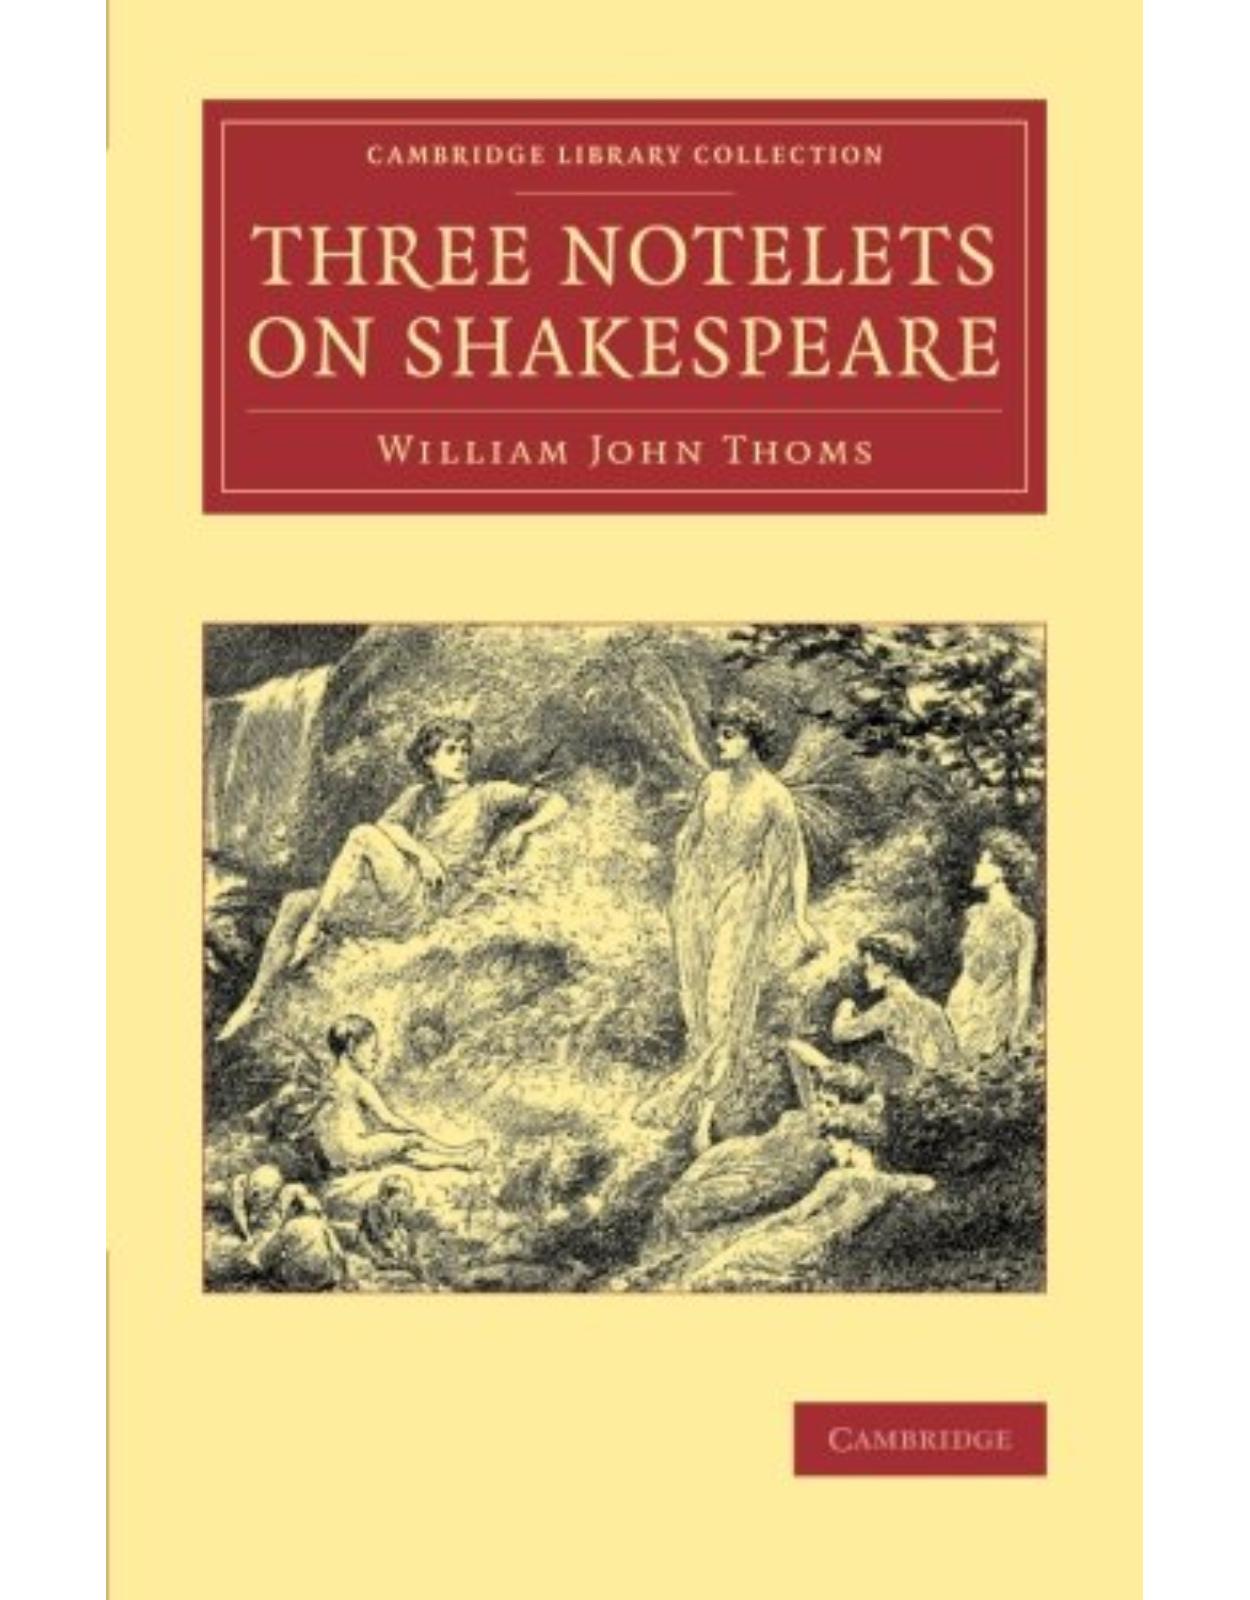 Three Notelets on Shakespeare (Cambridge Library Collection - Shakespeare and Renaissance Drama)